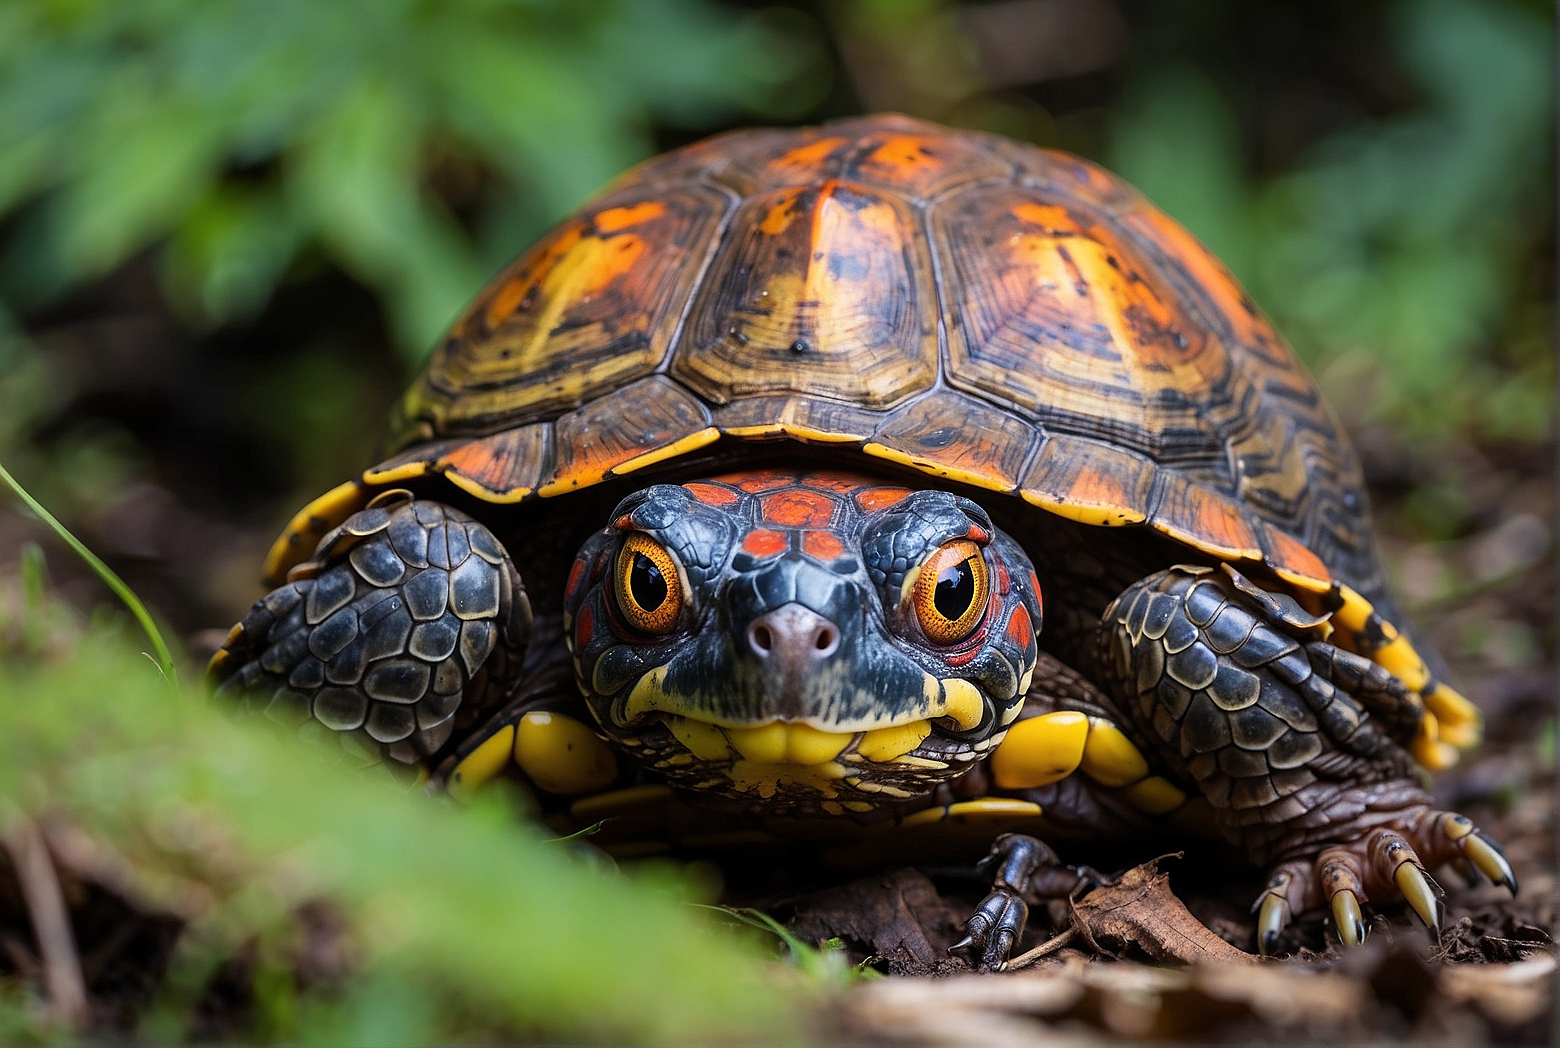 The Colorful Eyes of the Eastern Box Turtle